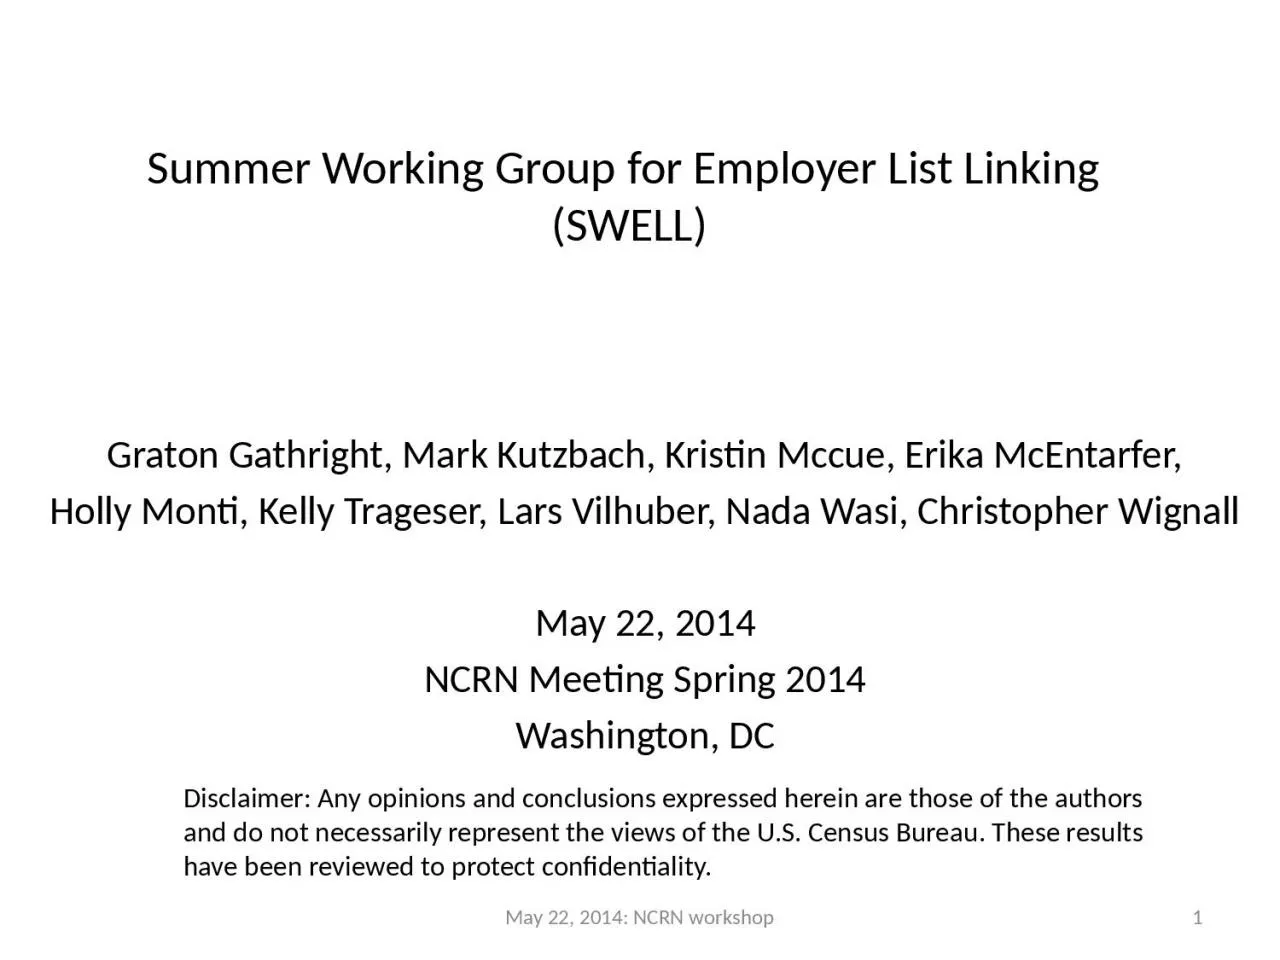 Summer Working Group for Employer List Linking